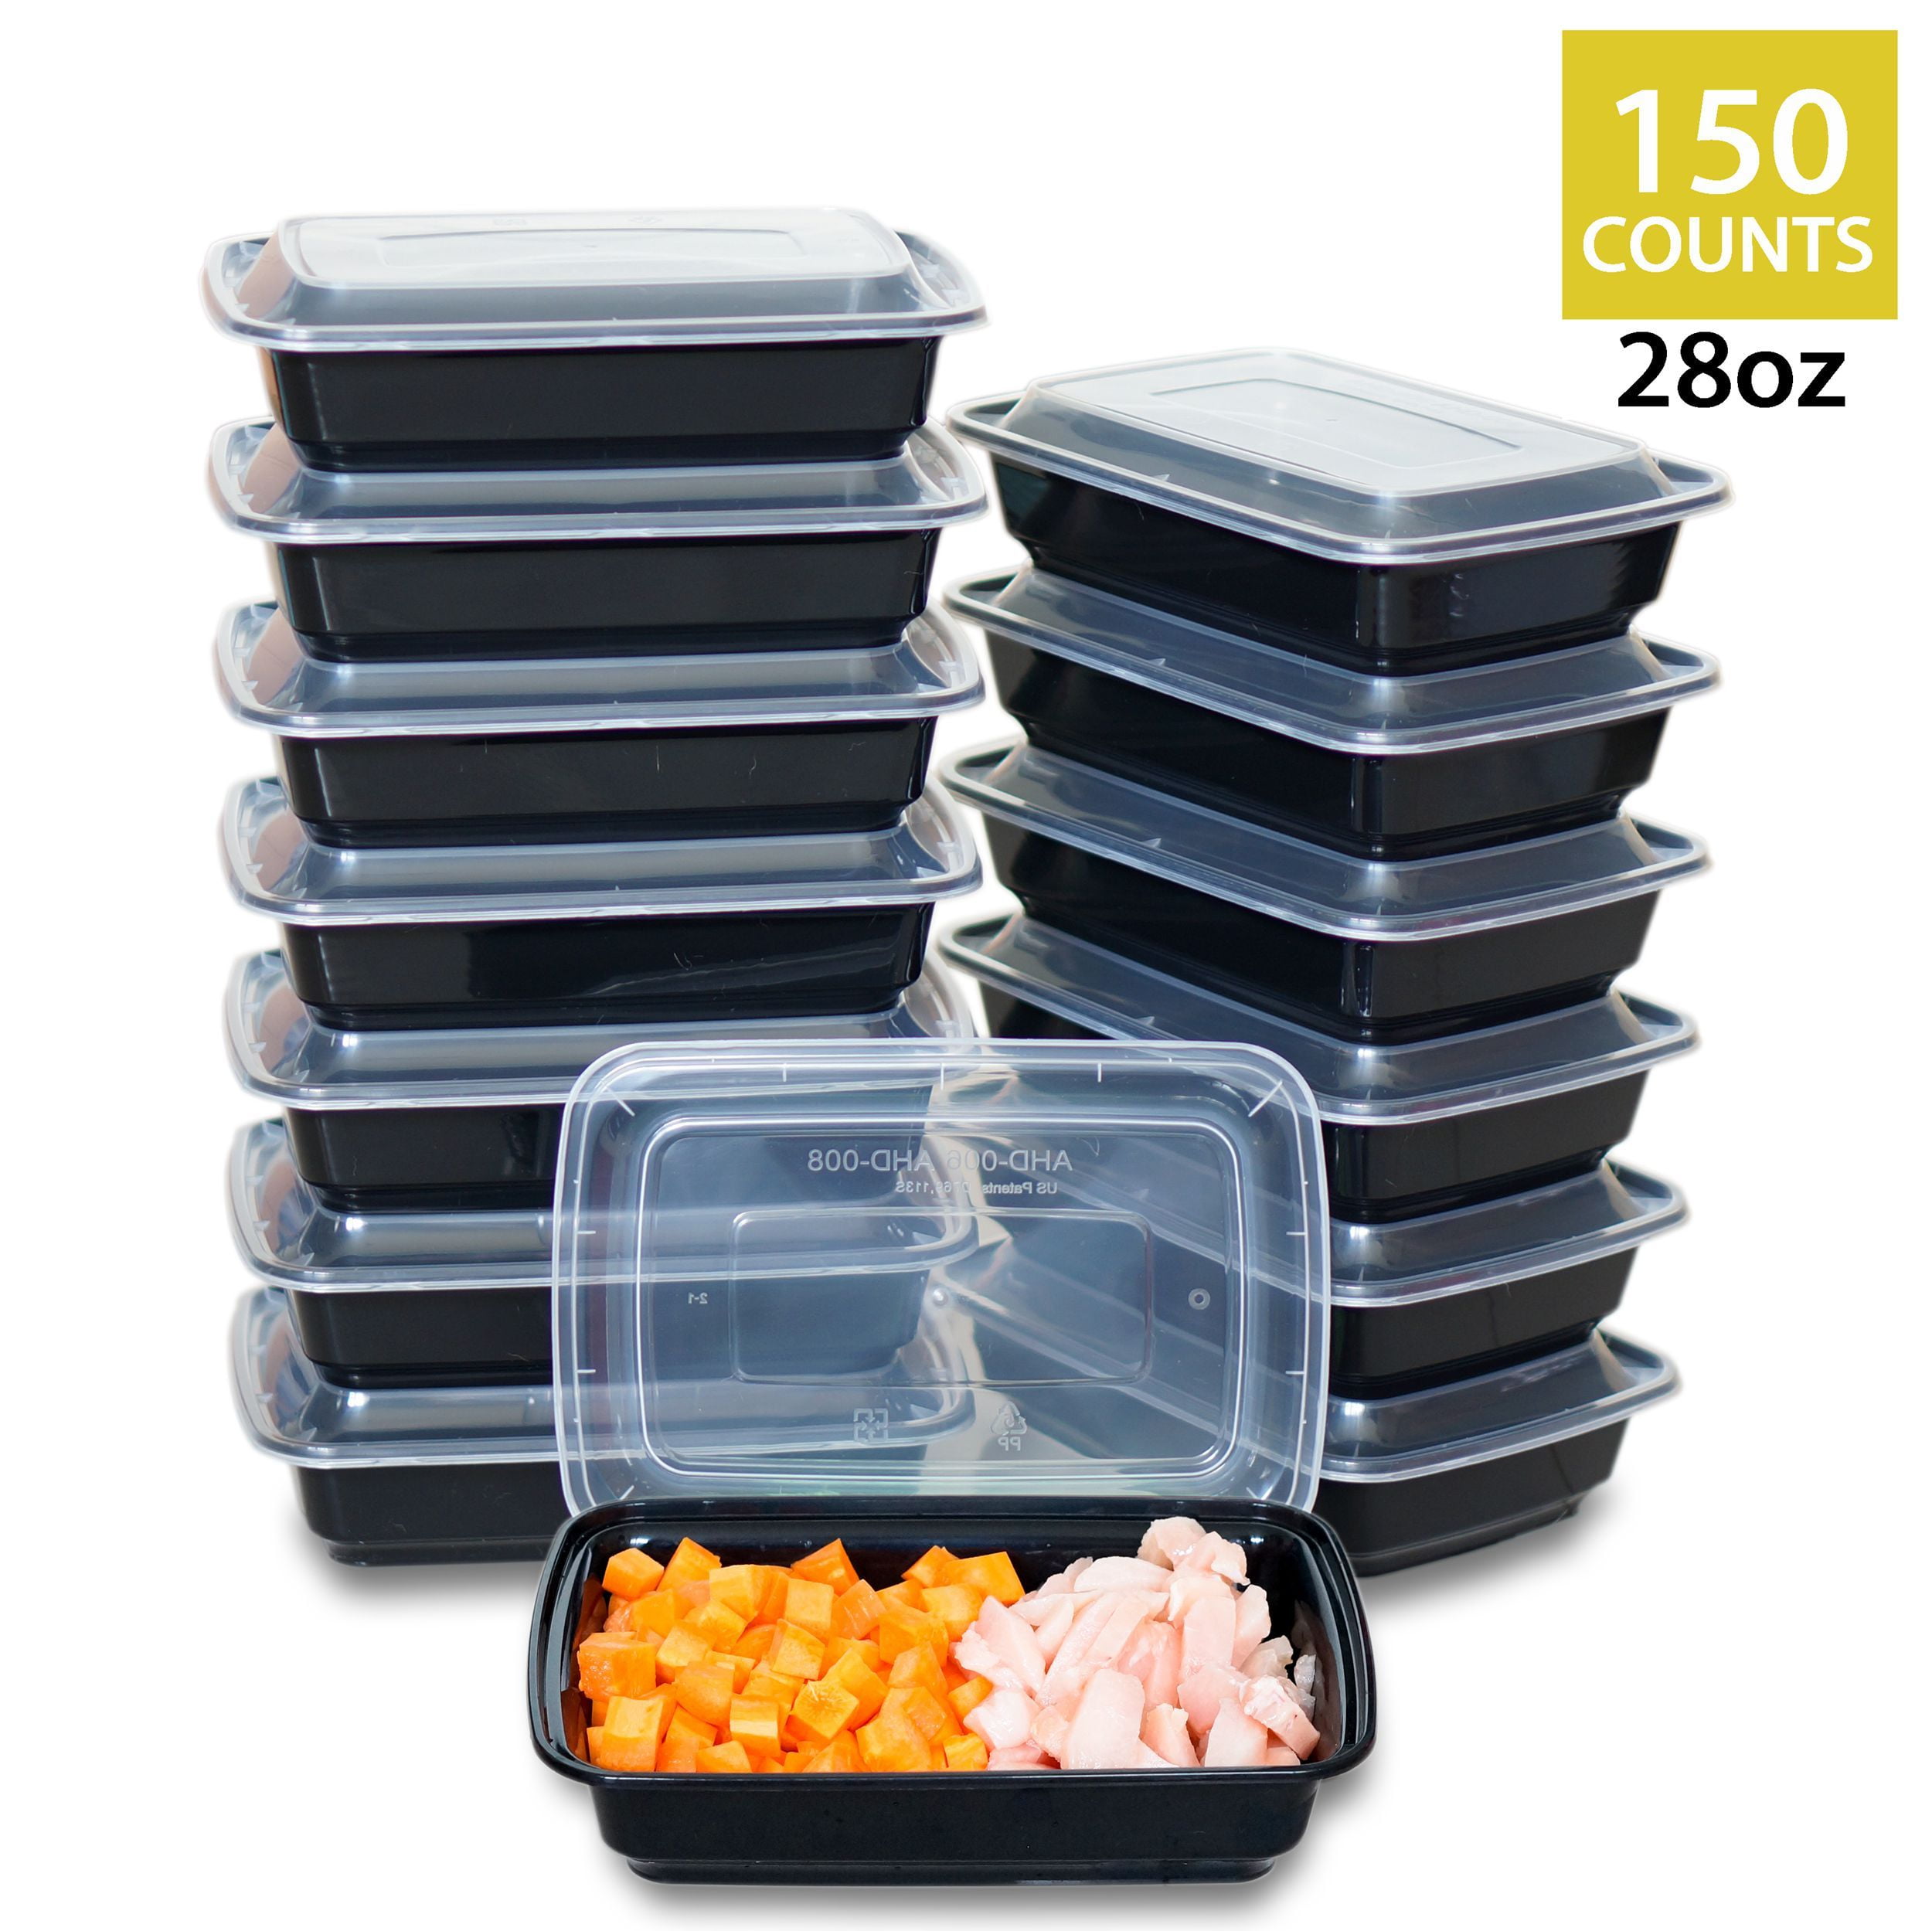 CTC-8300] 1 Compartment Rectangular Meal Prep Container with Lids